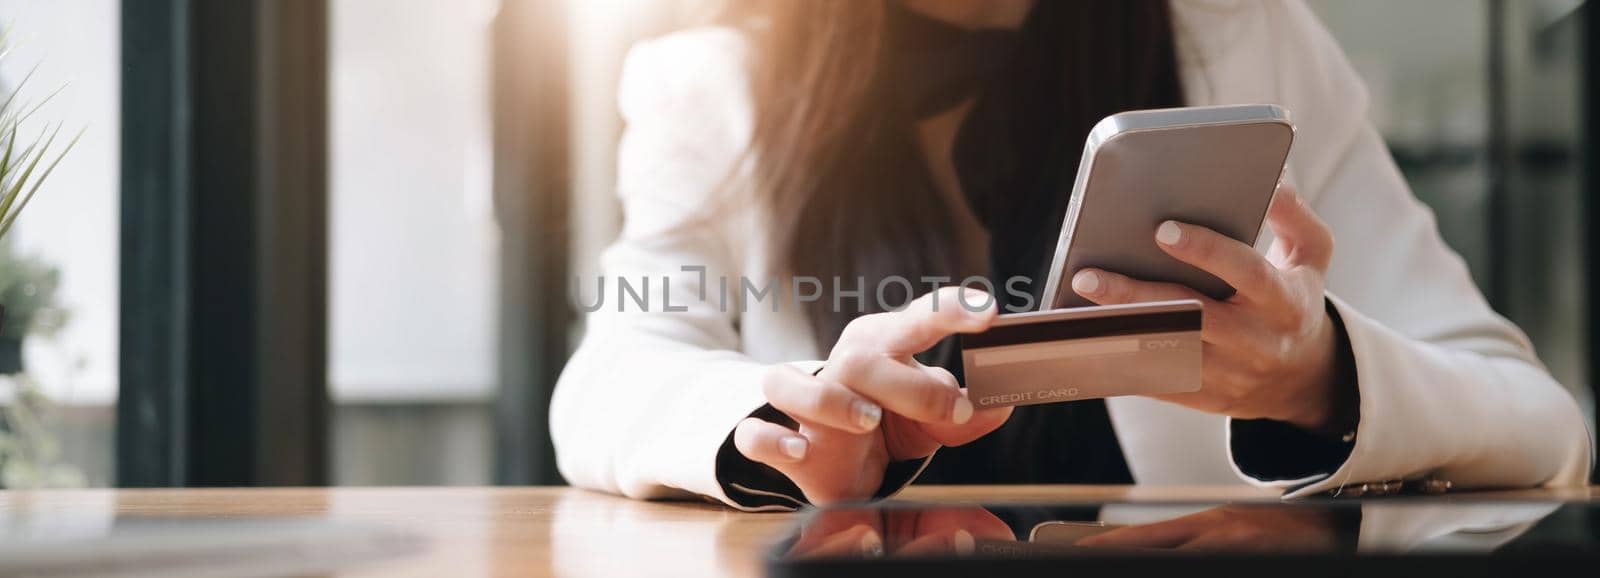 Close up female hands holding credit card and smartphone, young woman paying online, using banking service, entering information, shopping, ordering in internet store, doing secure payment.